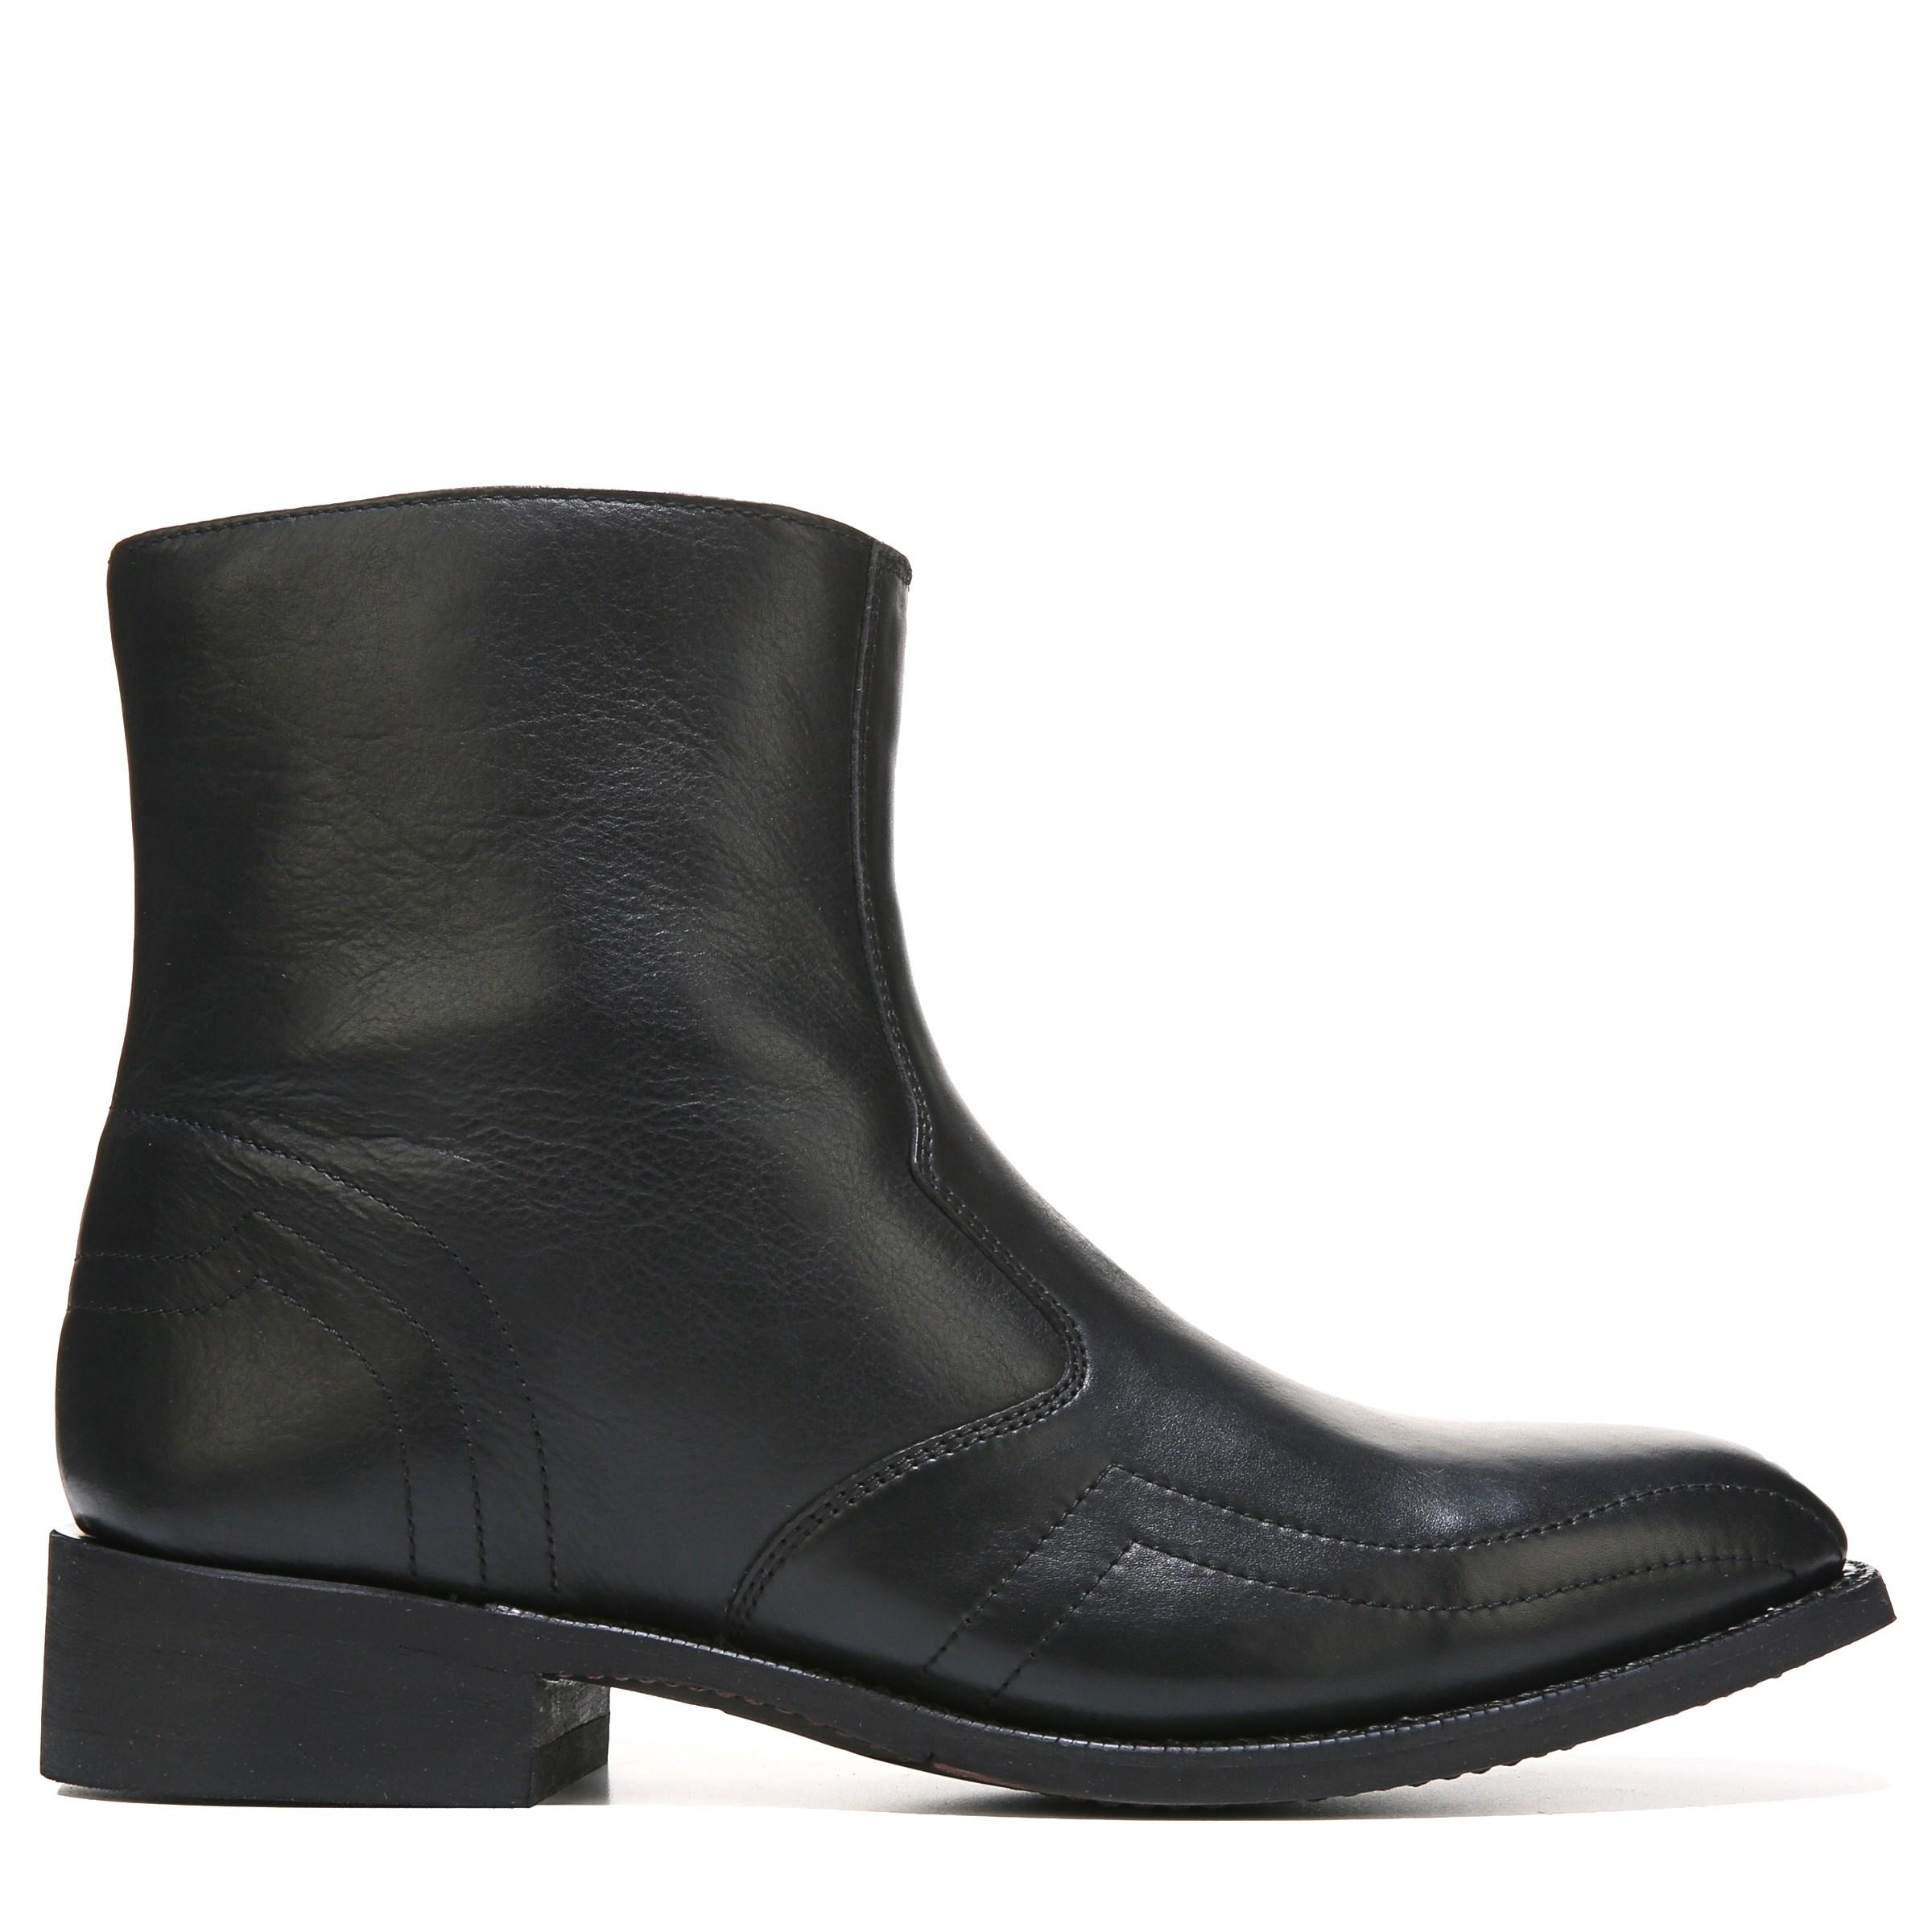 Laredo Leather Hoxie Medium/wide Side Zip Boots in Black for Men - Lyst